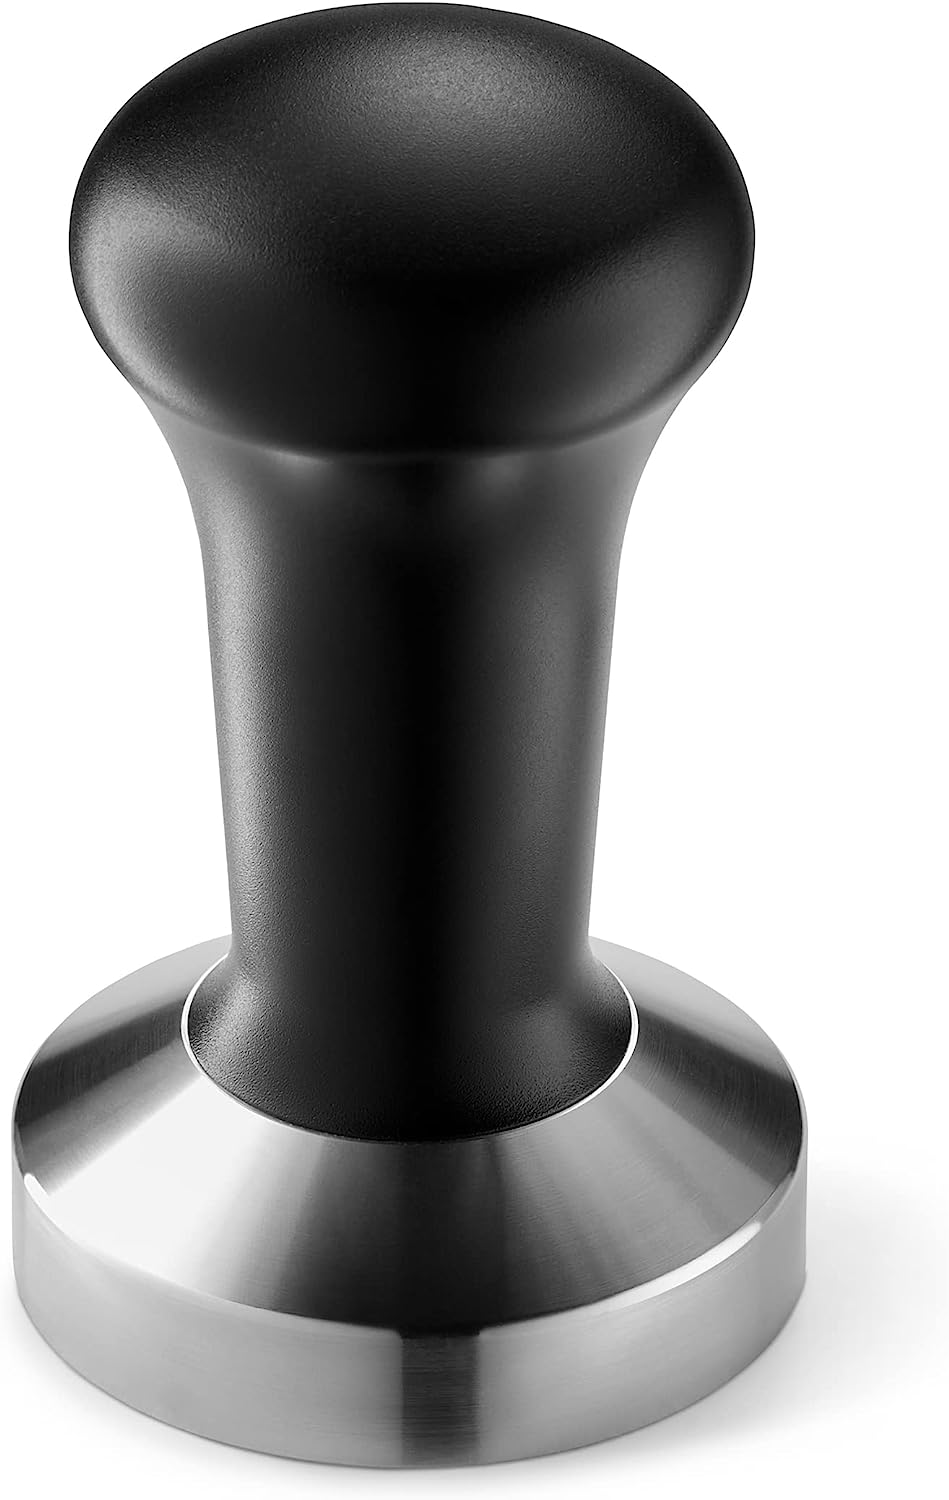 Tchibo Tamper, For Portafilter Espresso Machine, Espresso Tamper for Compacting Coffee Flour, For Filter Holder's with 51 mm, Dishwasher-Safe, Rust-Proof Stainless Steel